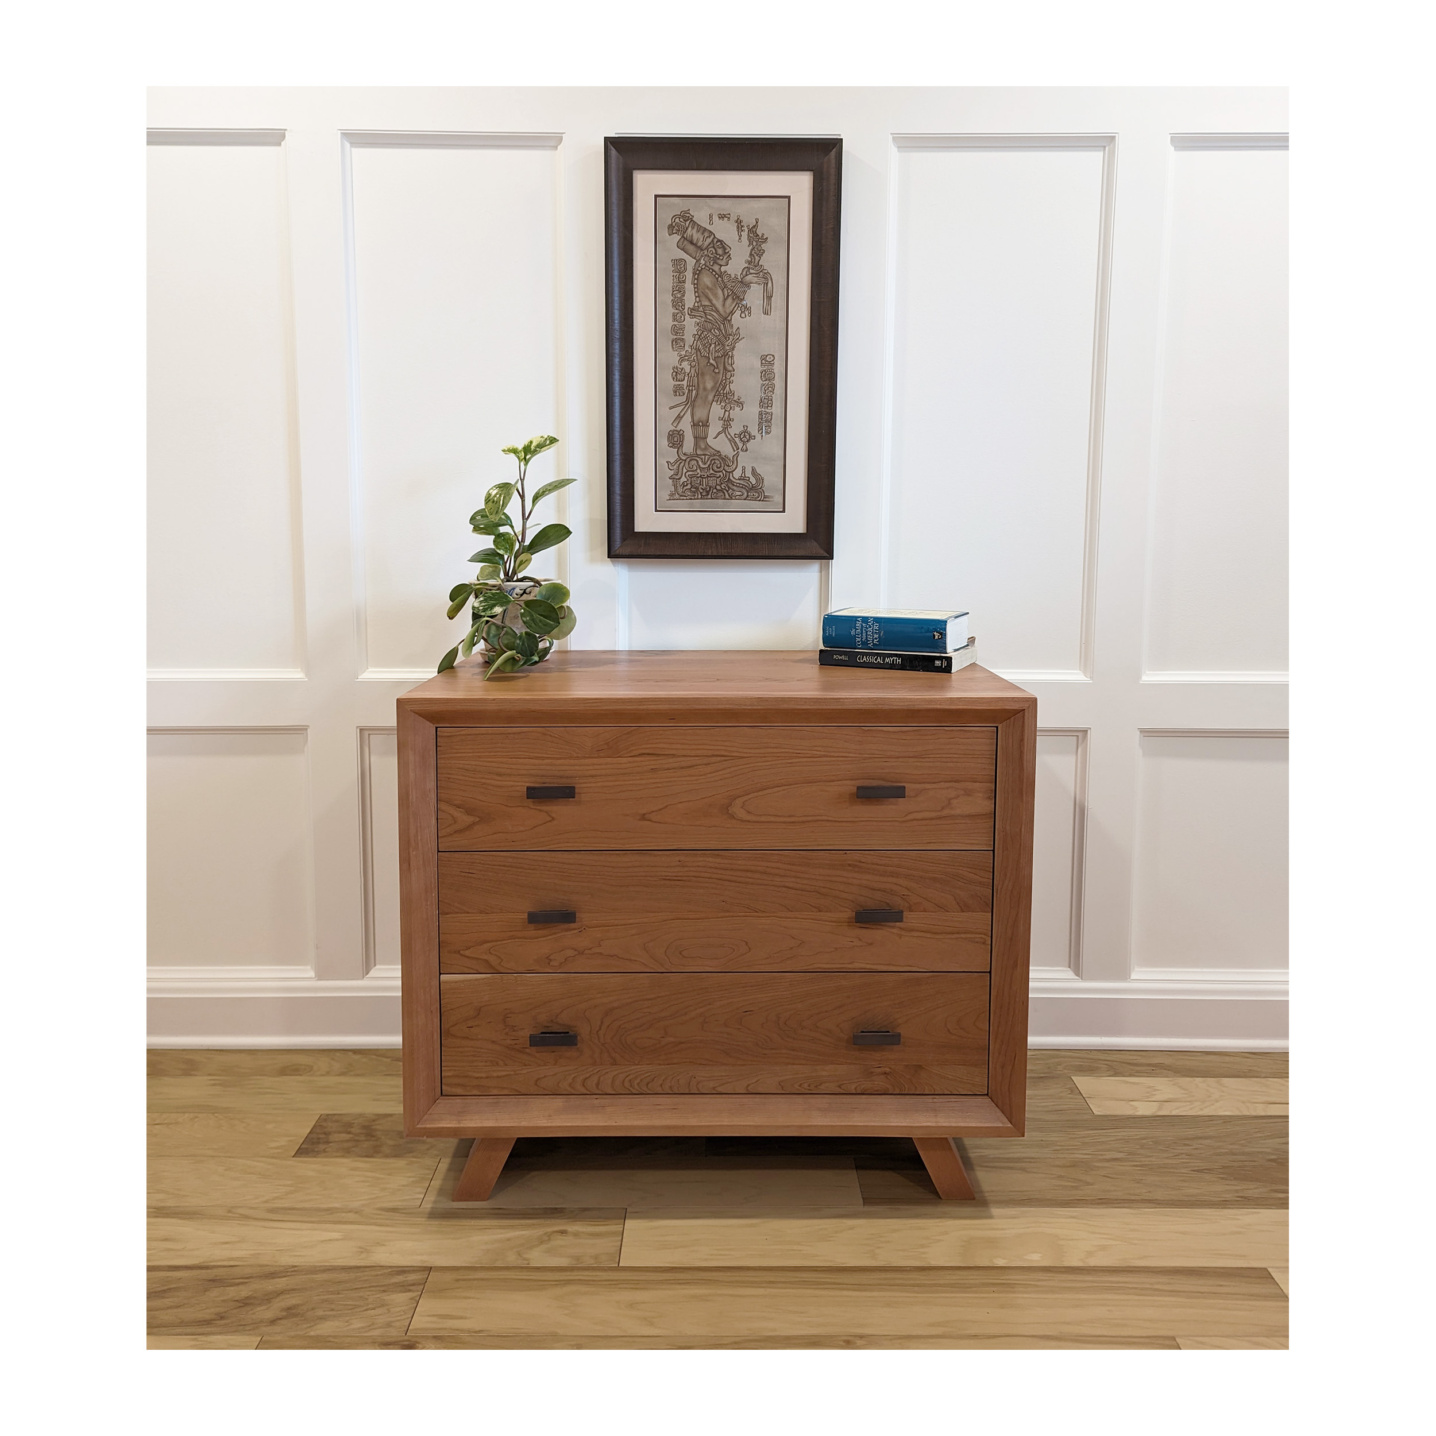 Cherry three drawer dresser constructed in solid woods